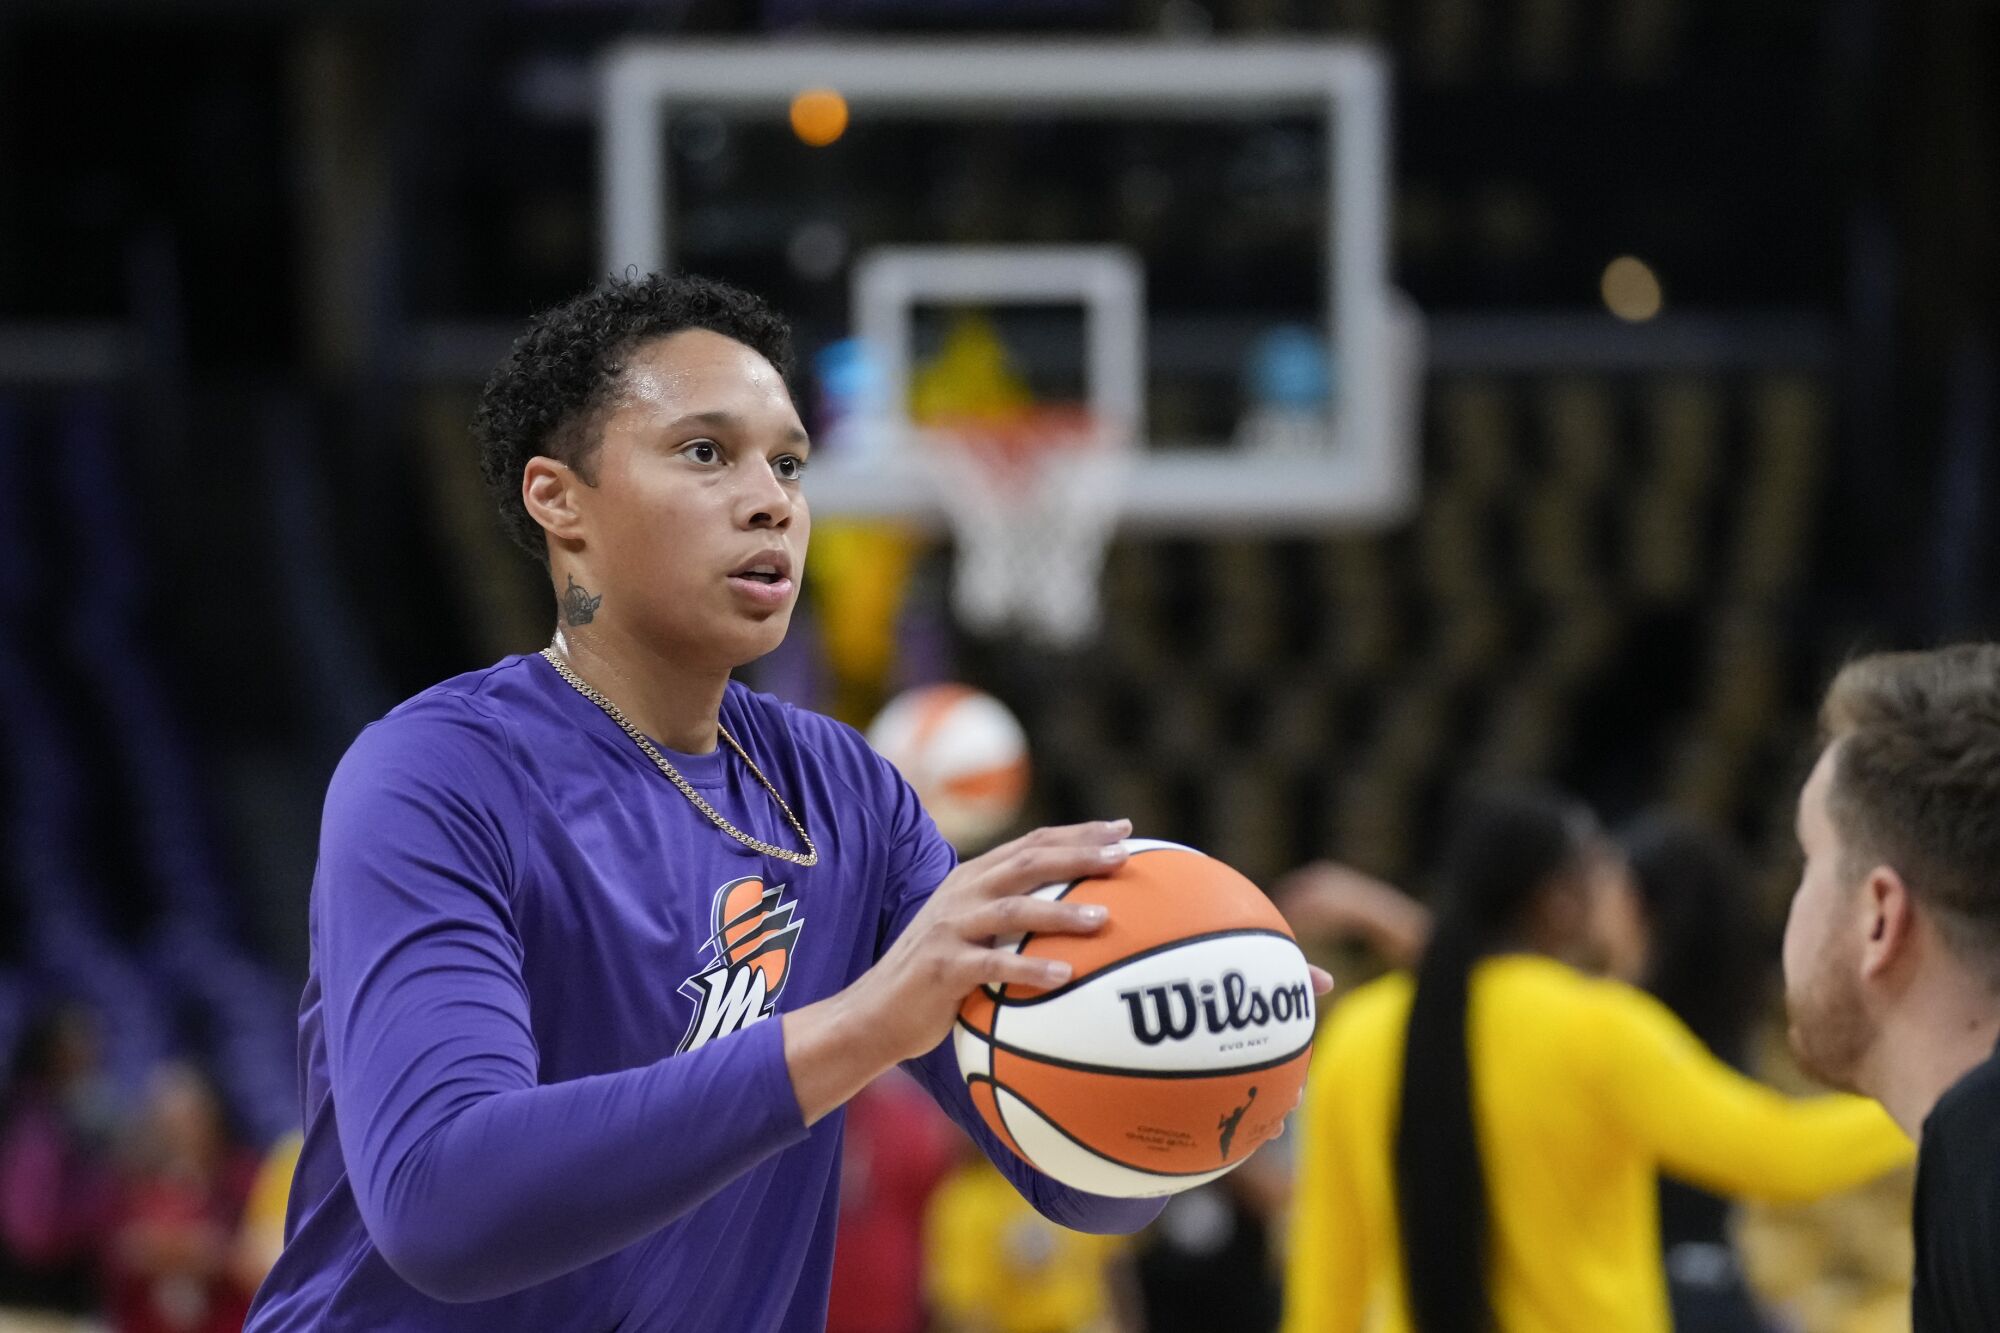 Phoenix Mercury center Brittney Griner prepares to shoot the ball while warming up before facing the Sparks.